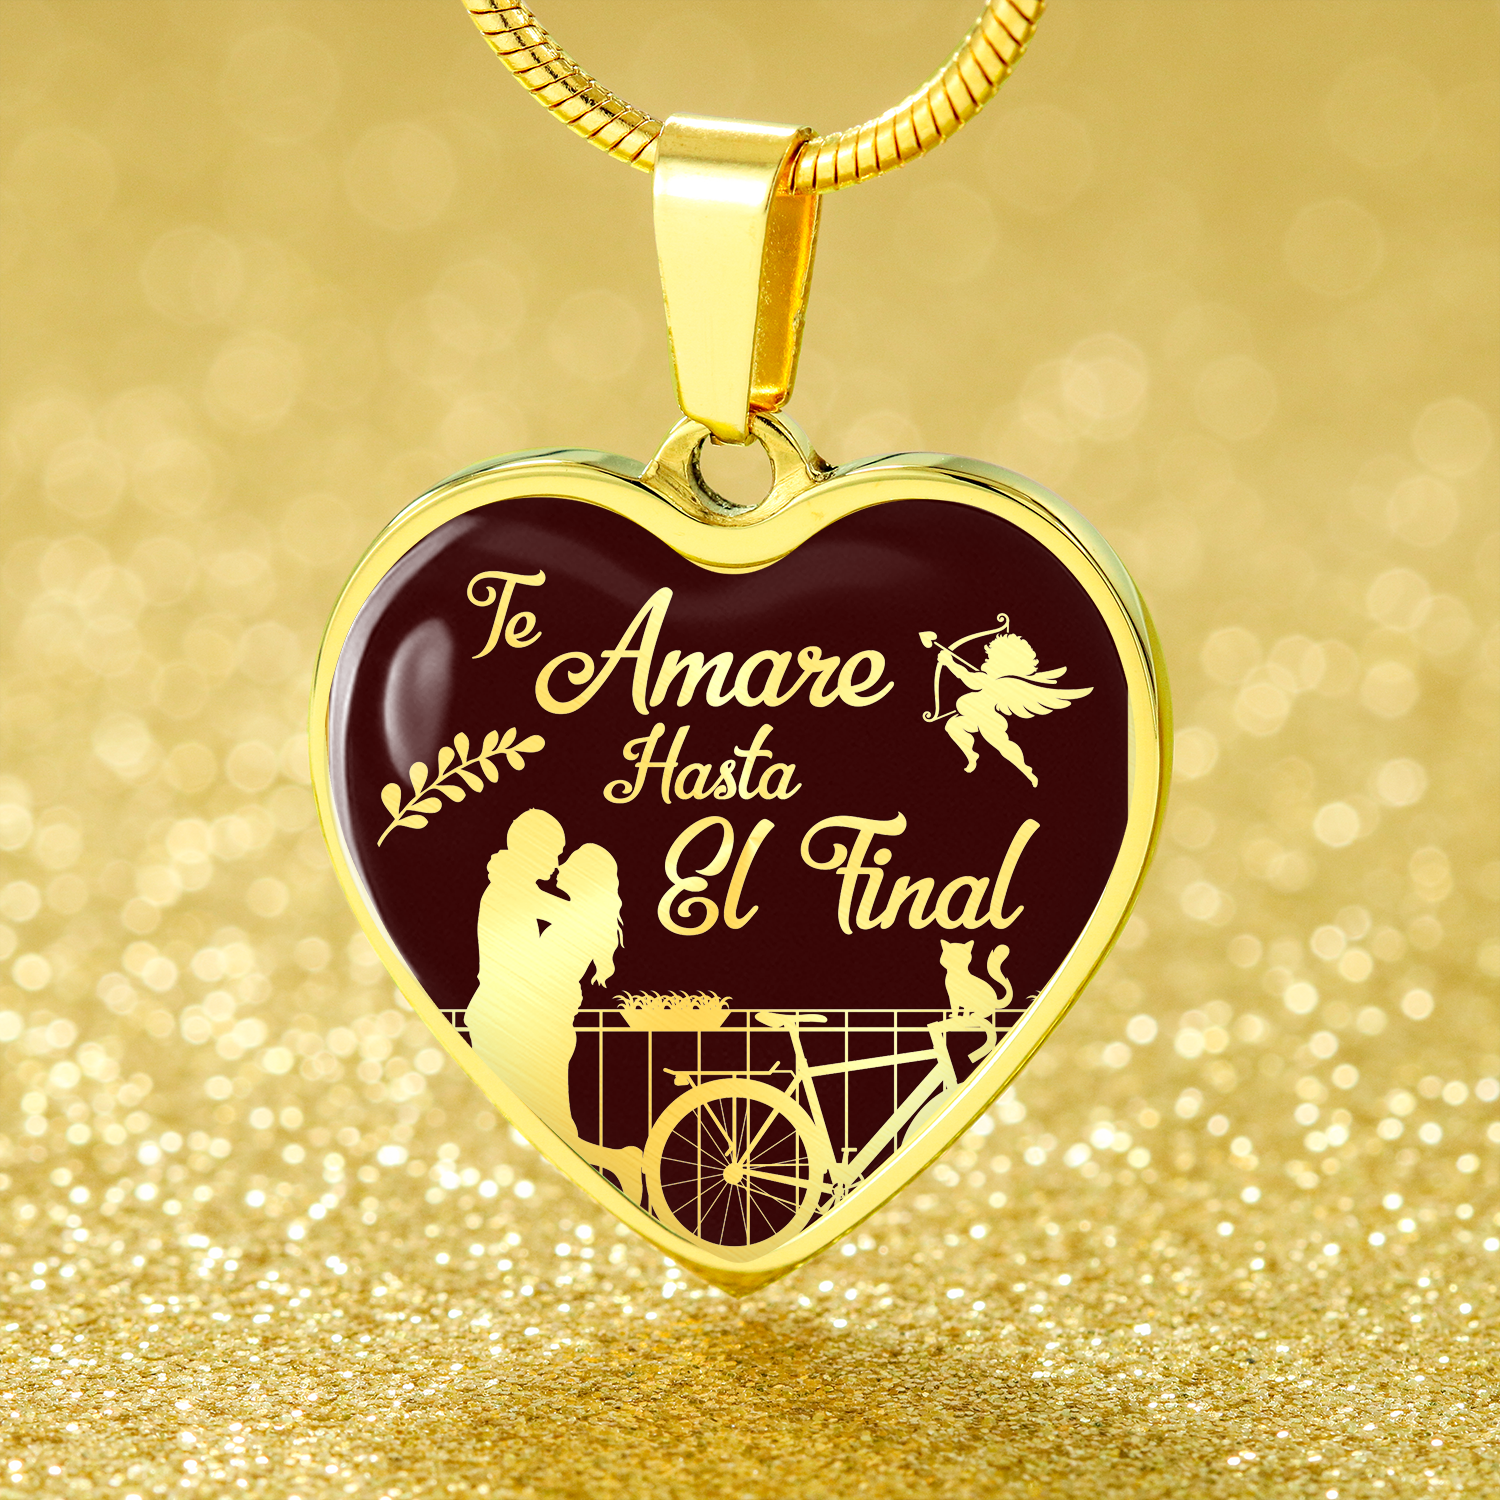 I Love You Till The End Necklace Te Amare Hasta El Final Stainless Steel or 18k Gold Heart Pendant 18-22"'' - Express Your Love Gifts